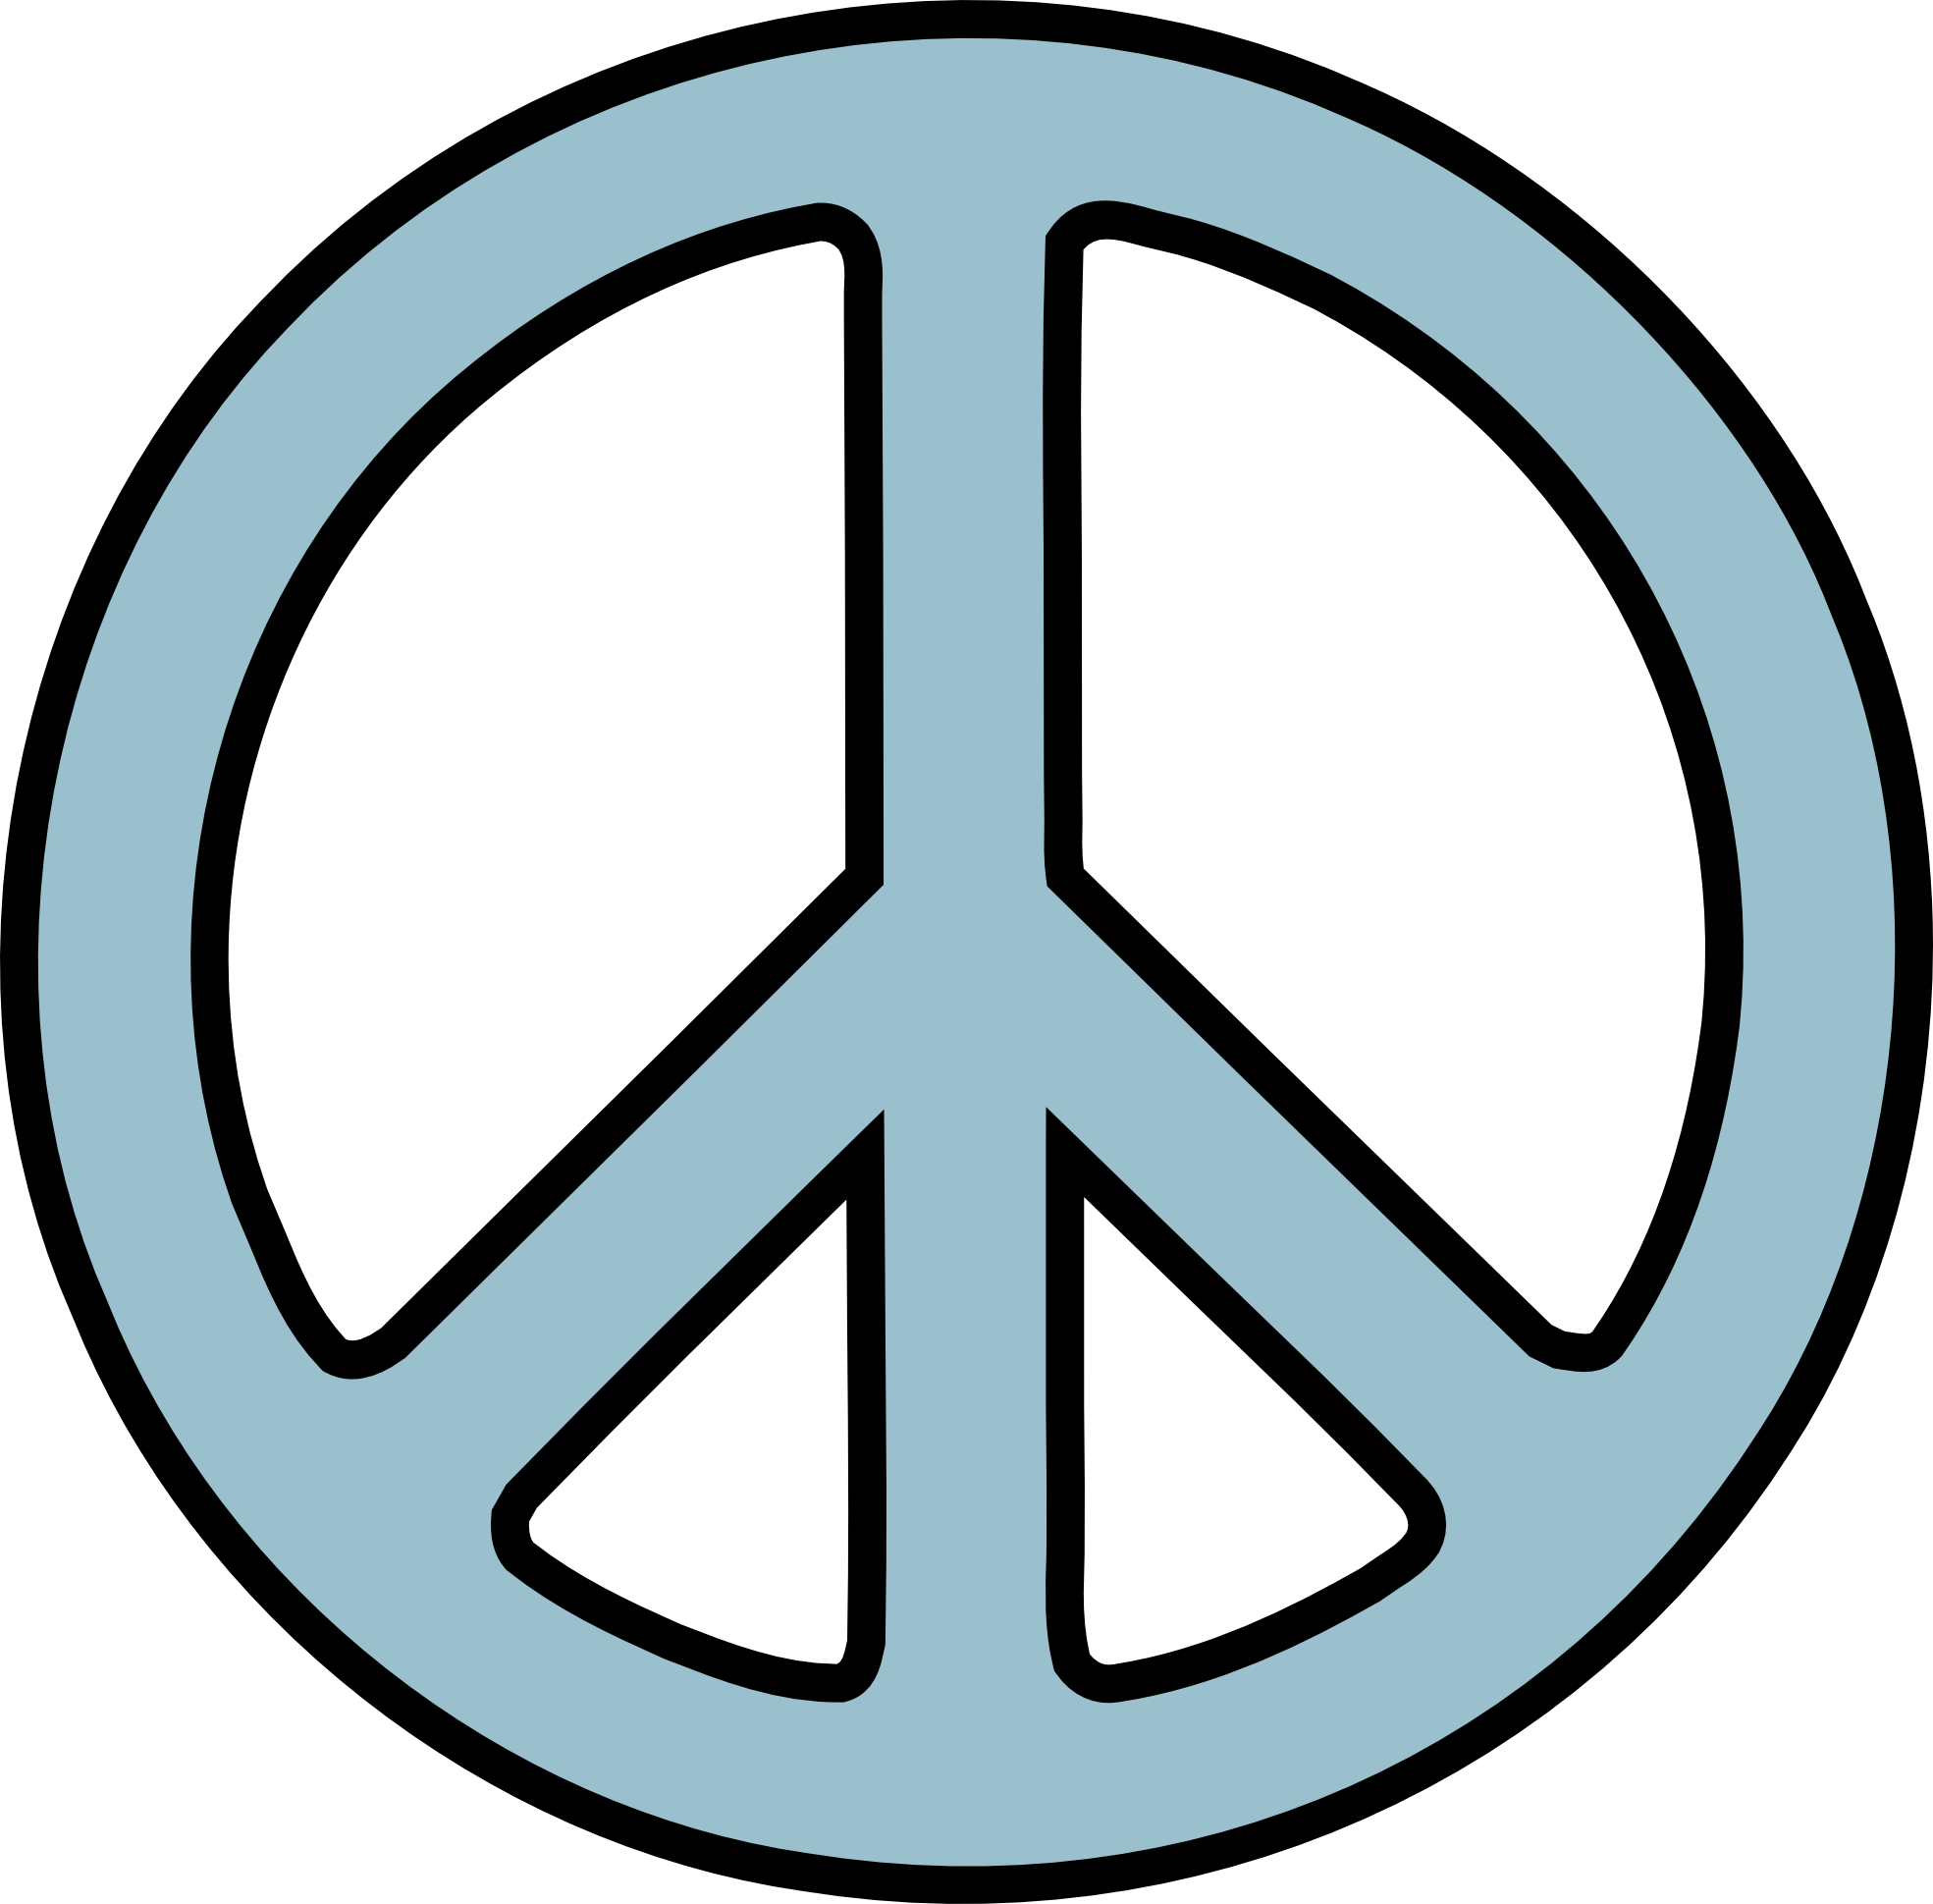 Peace Sign Clip Art Black And White | Clipart library - Free Clipart 